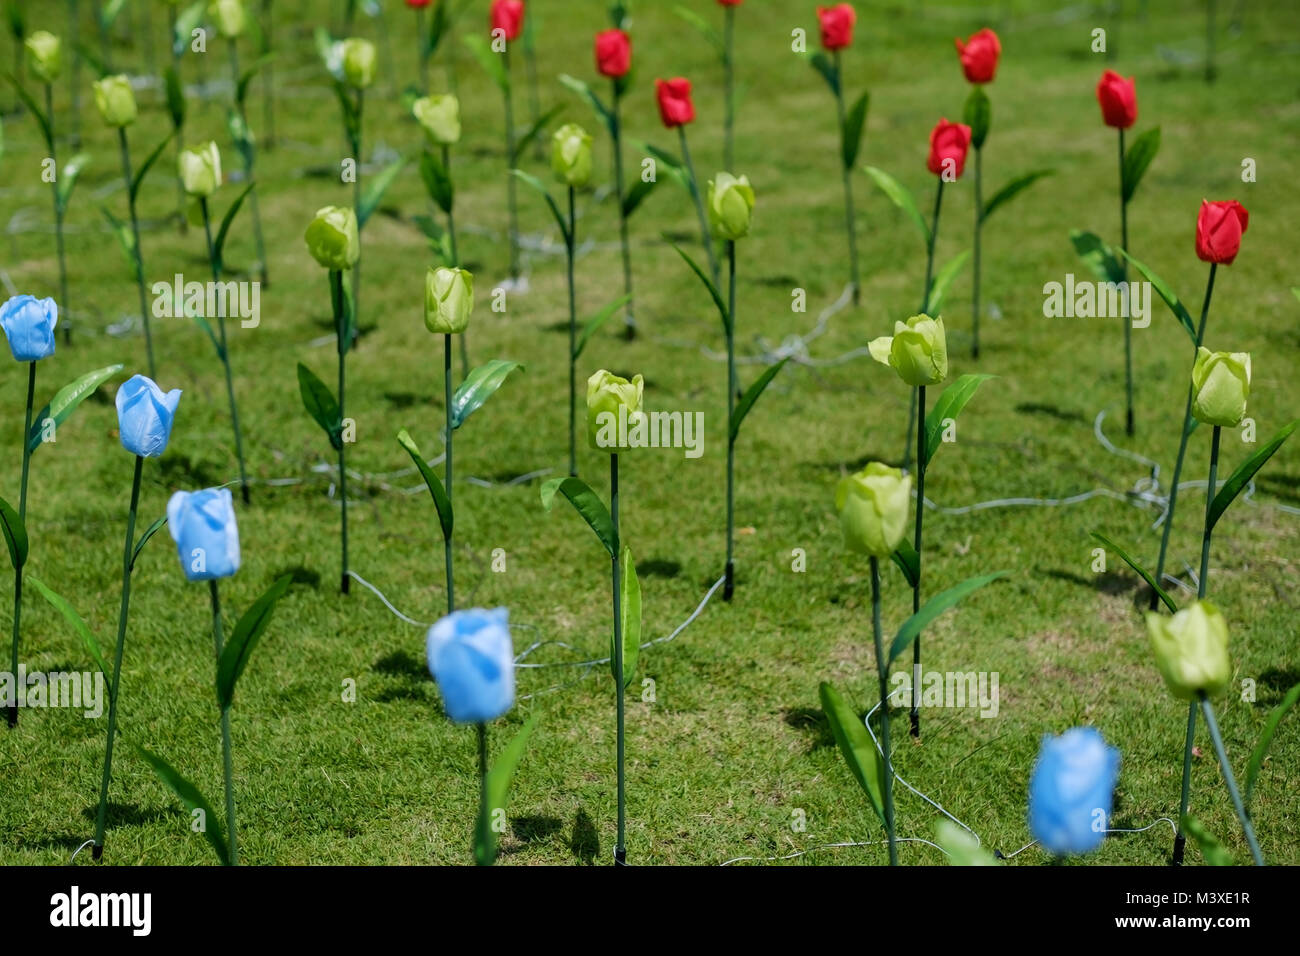 Green field with artificial flowers Stock Photo